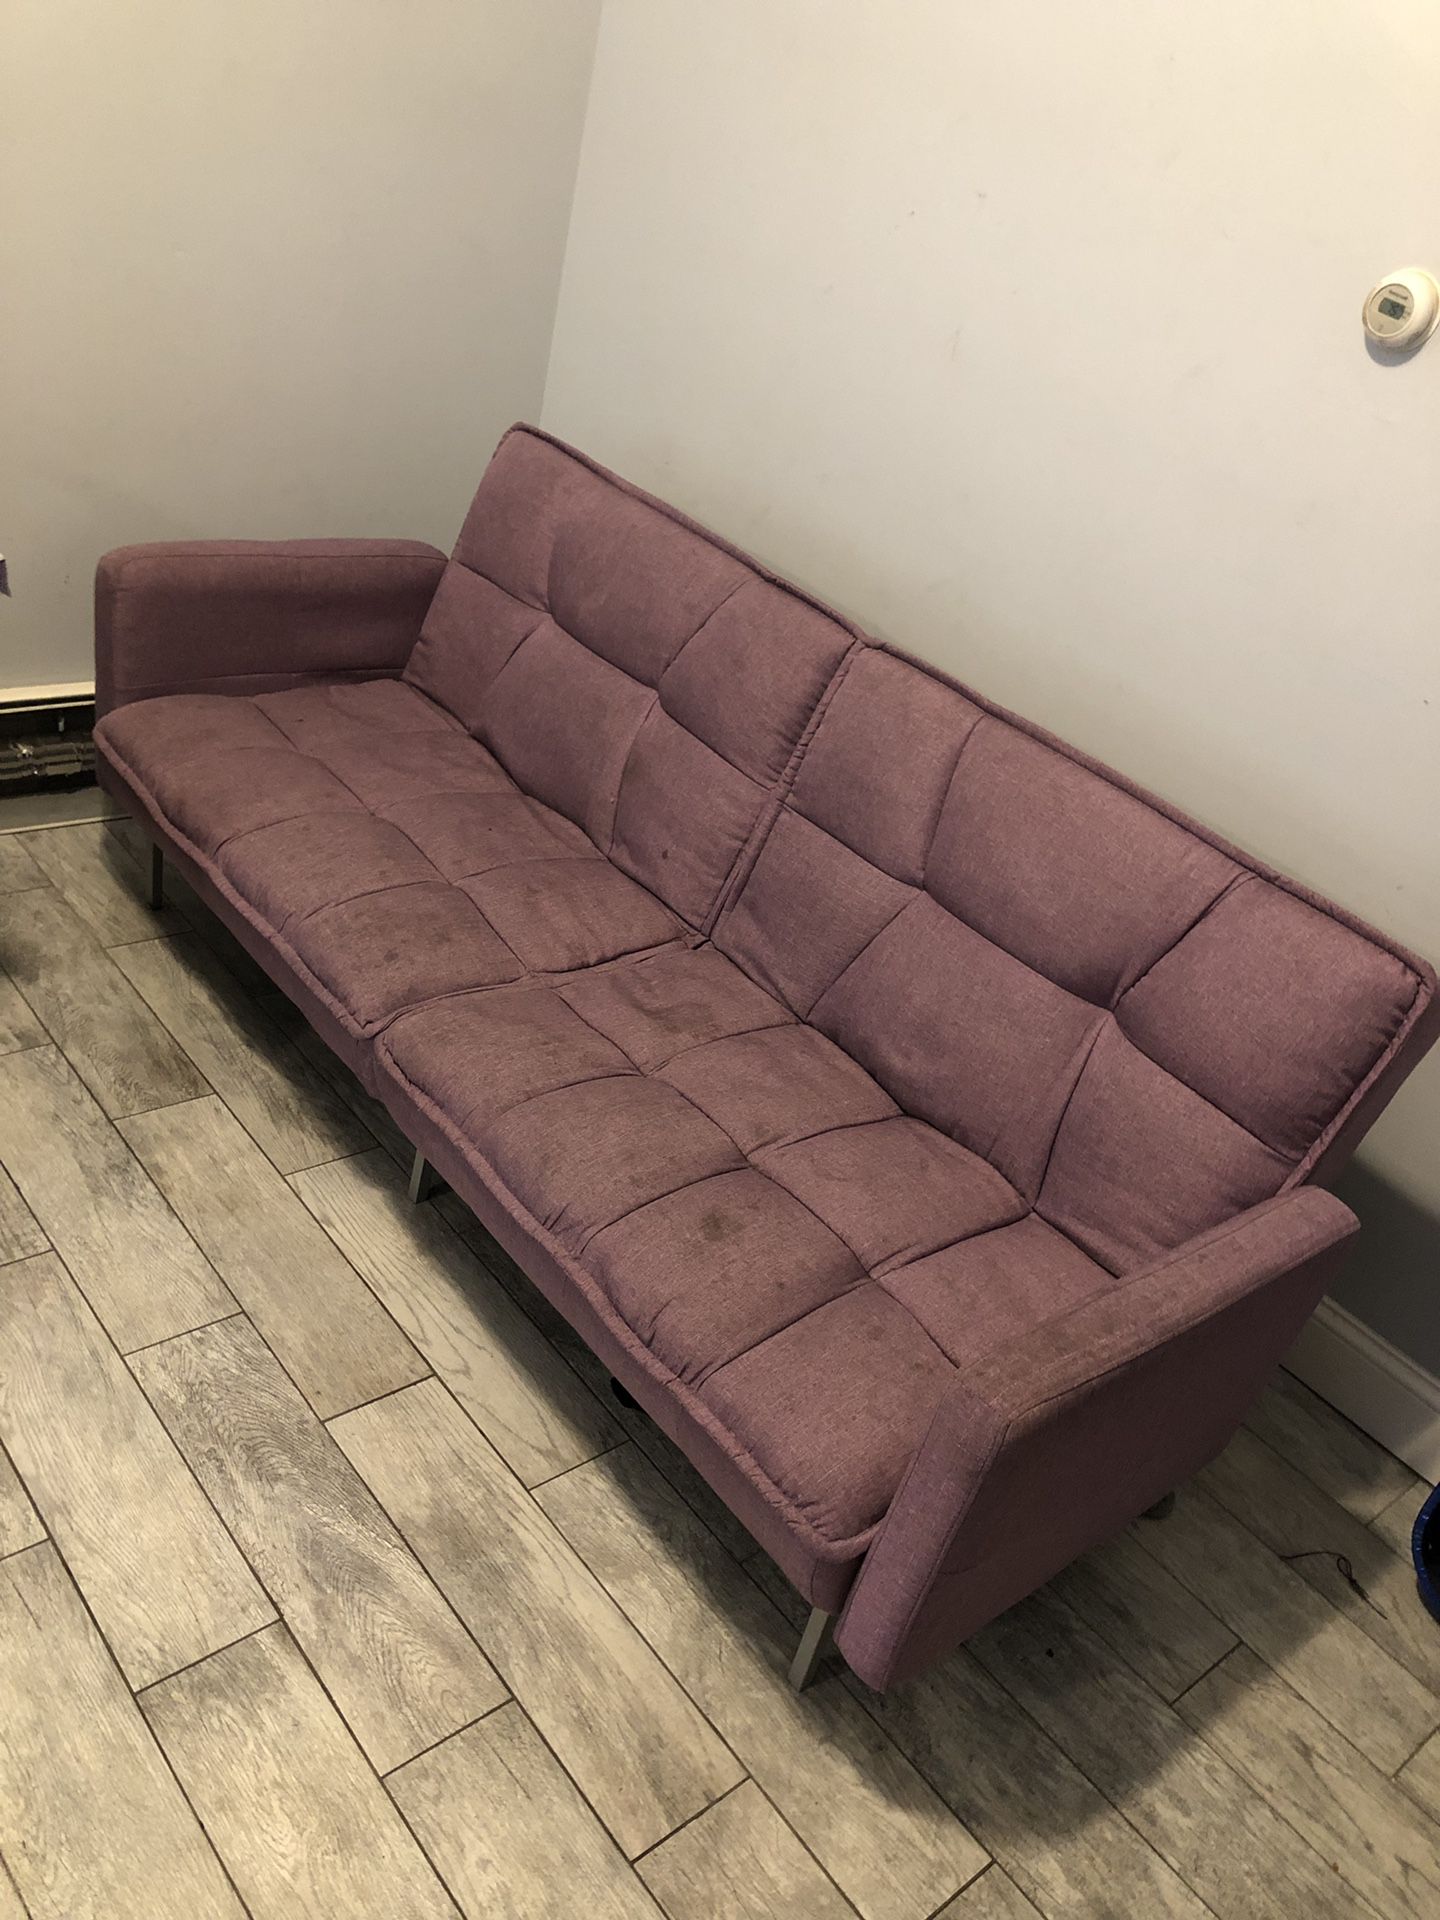 Futon and Picnic Table For Free